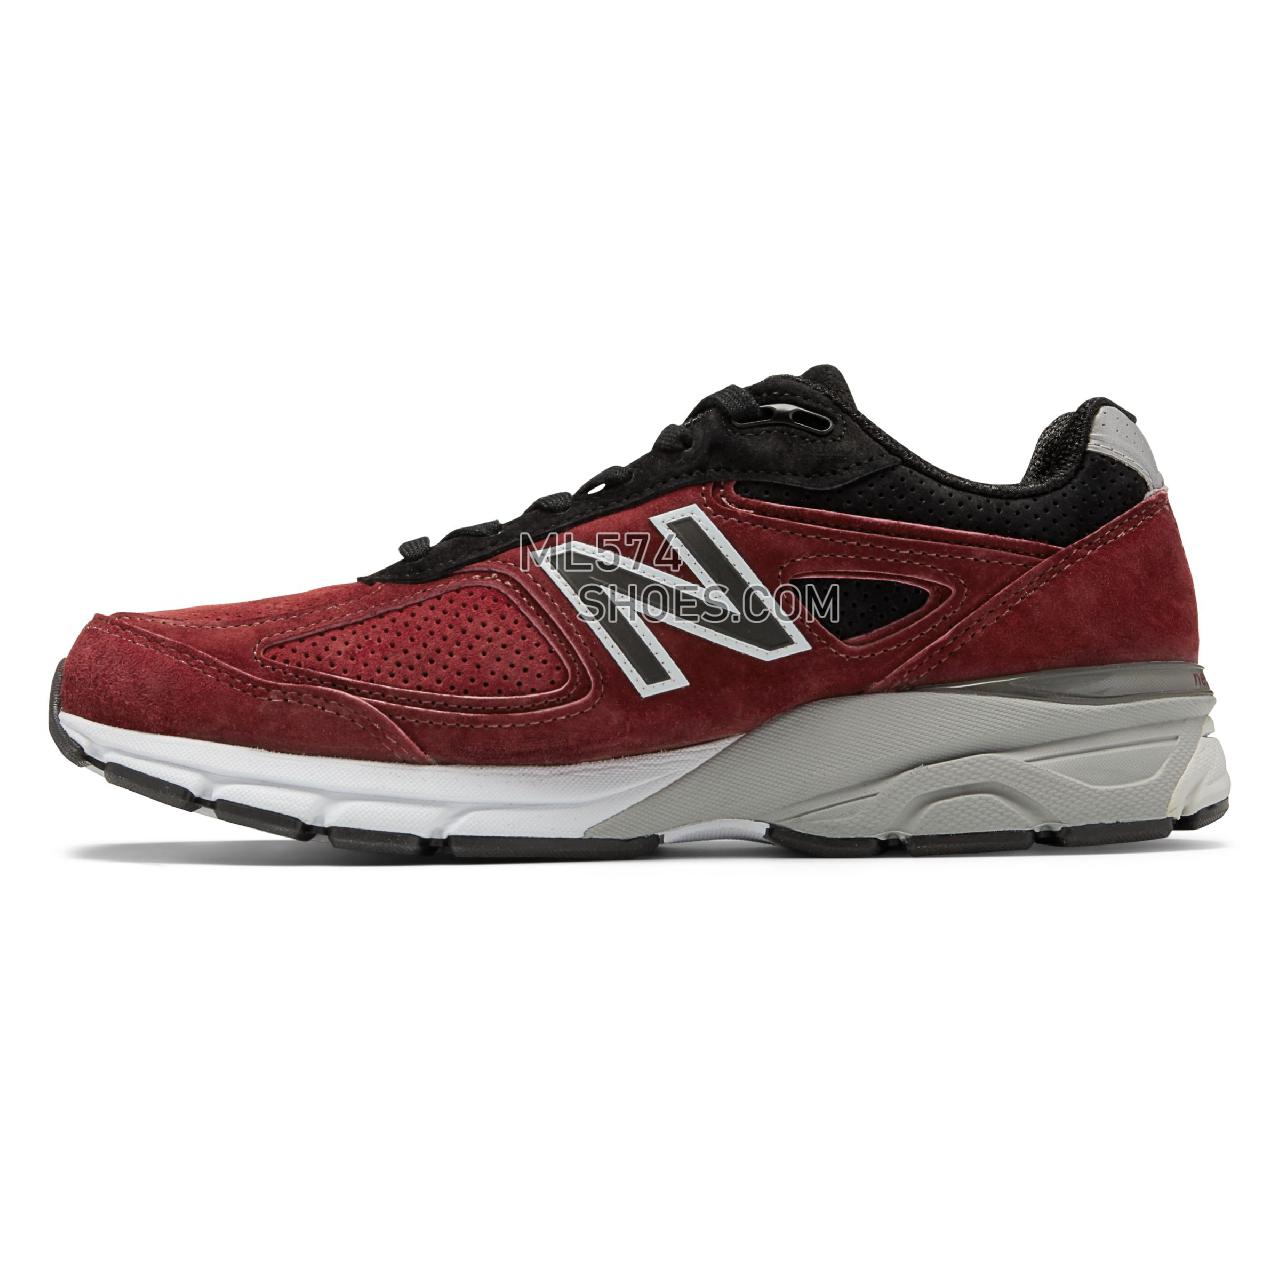 New Balance Mens 990v4 Made in US - Men's 990 - Running Mercury Red with Black - M990RB4